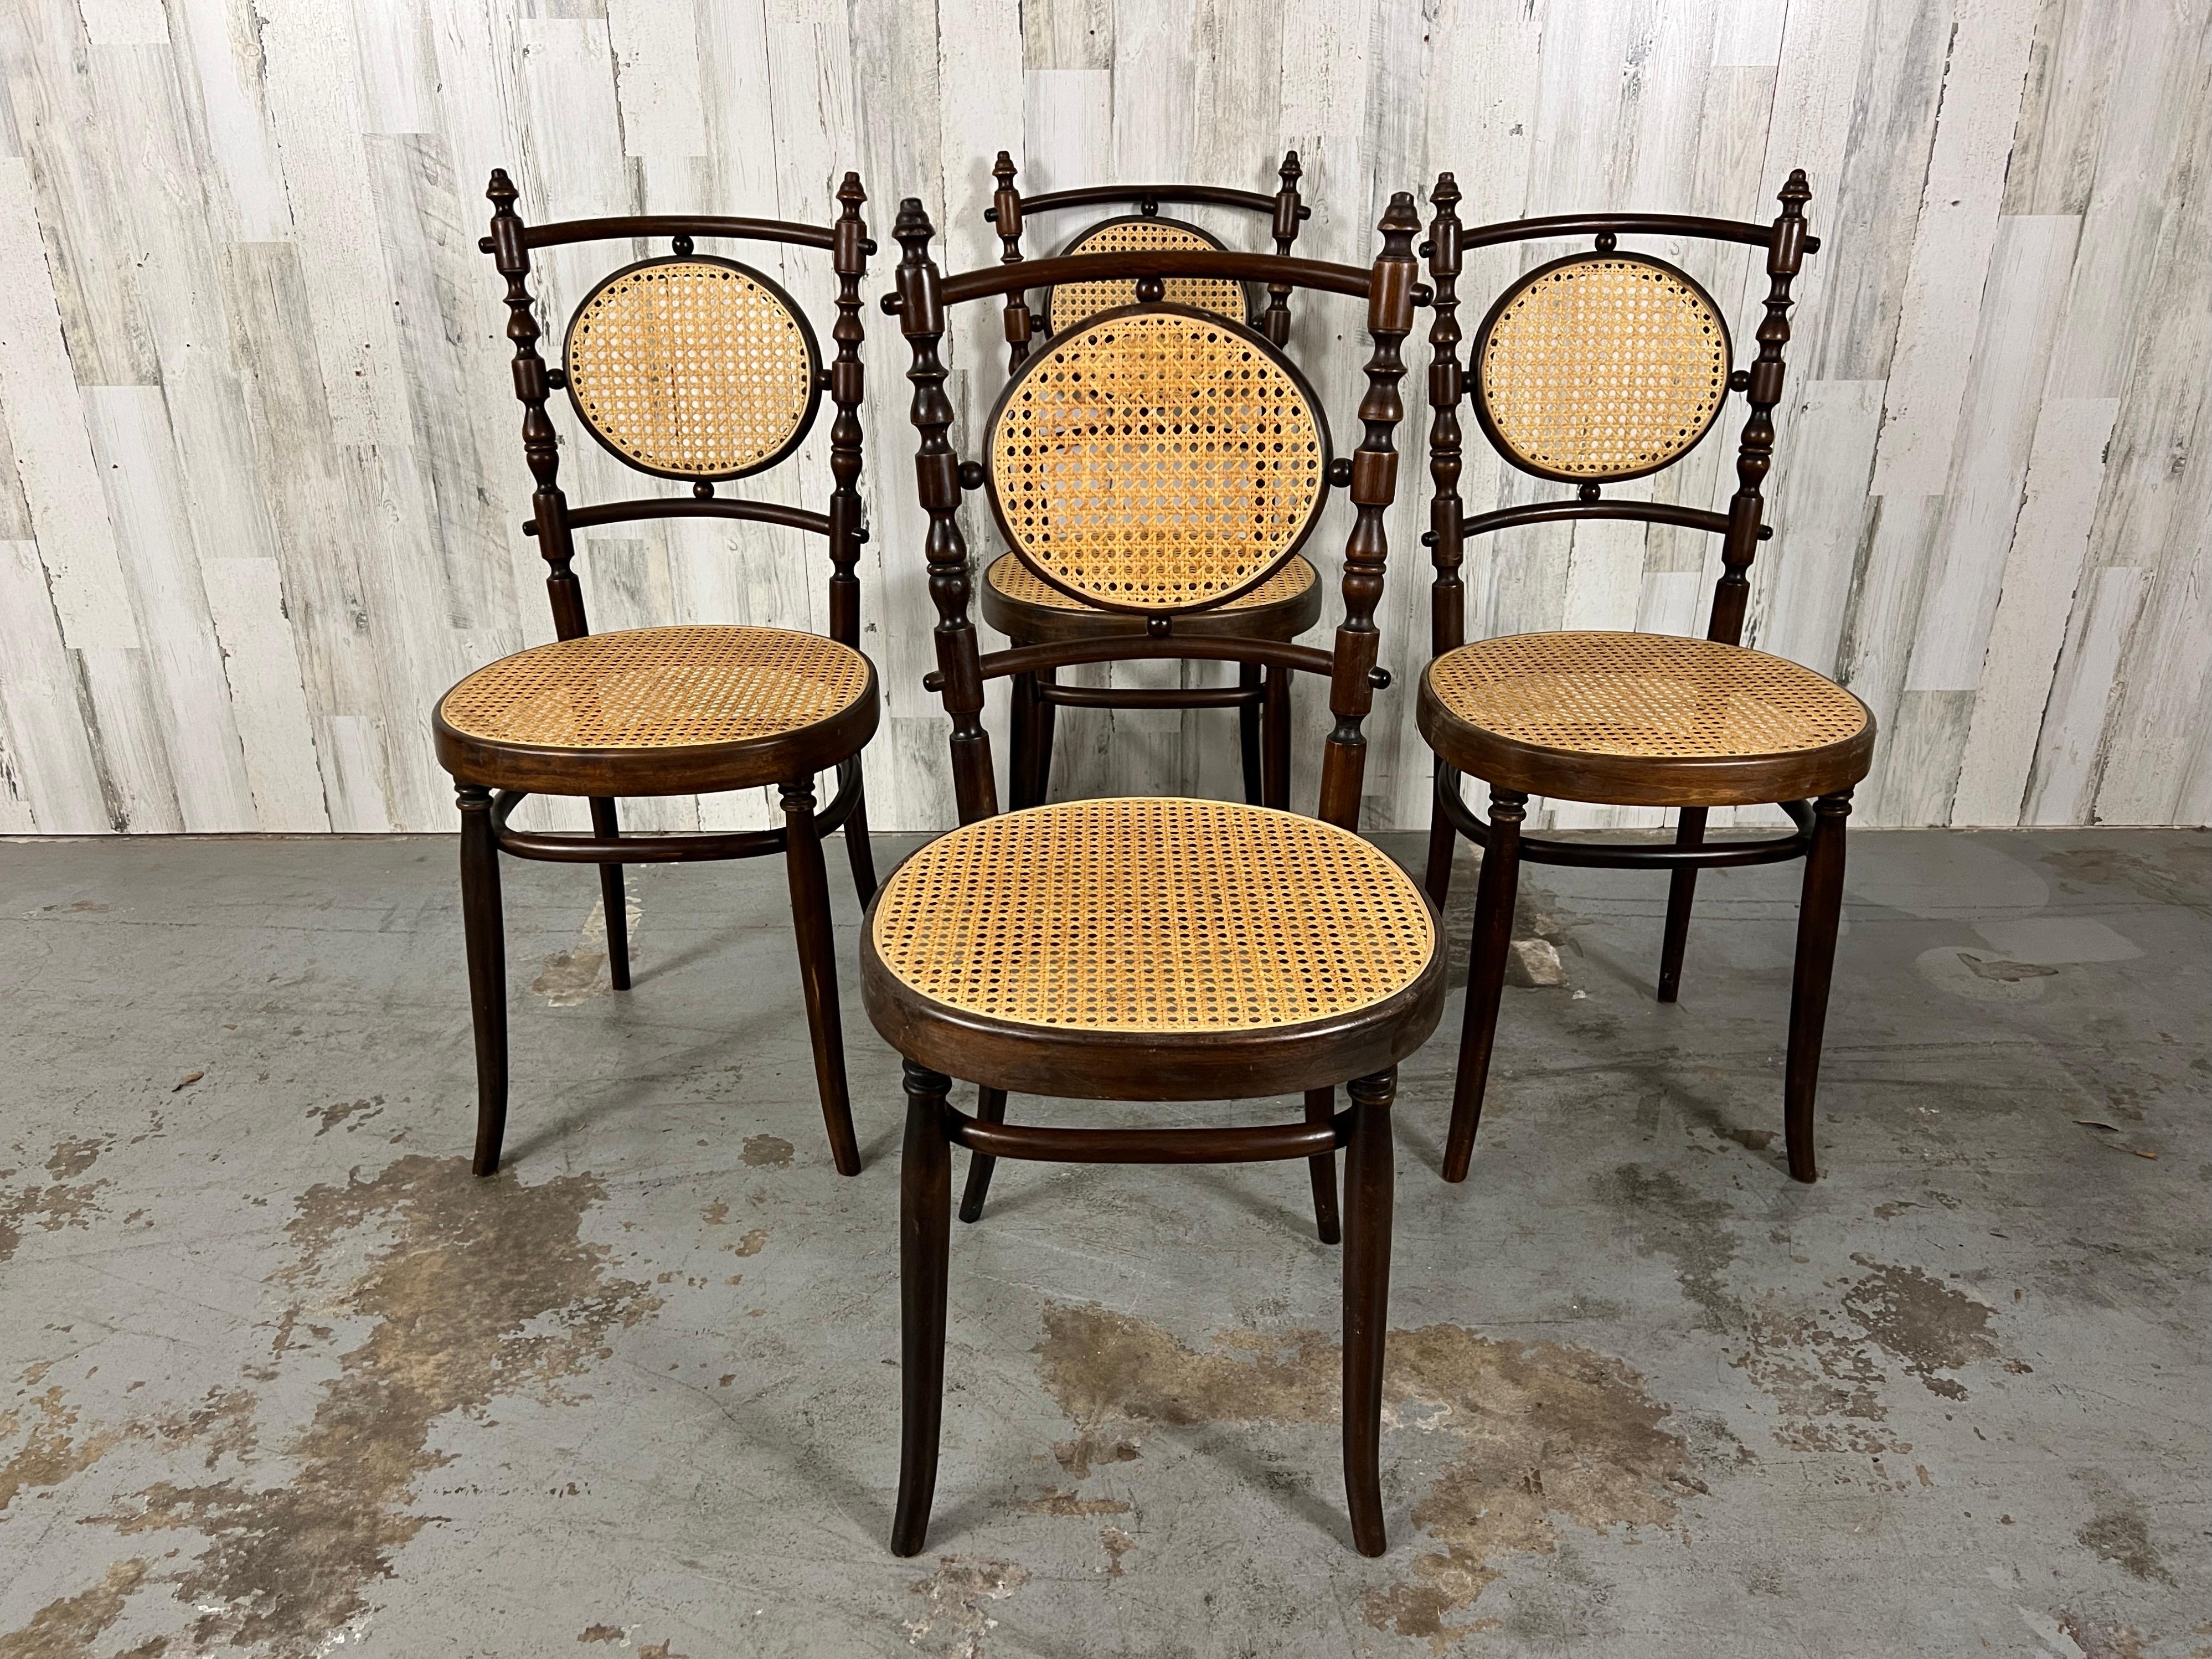 Beautiful set of four bentwood dining chairs by Italian designer Salvatore Leone. Two tone staining on the wood adds a rustic elegance on these very sturdy petit chairs.